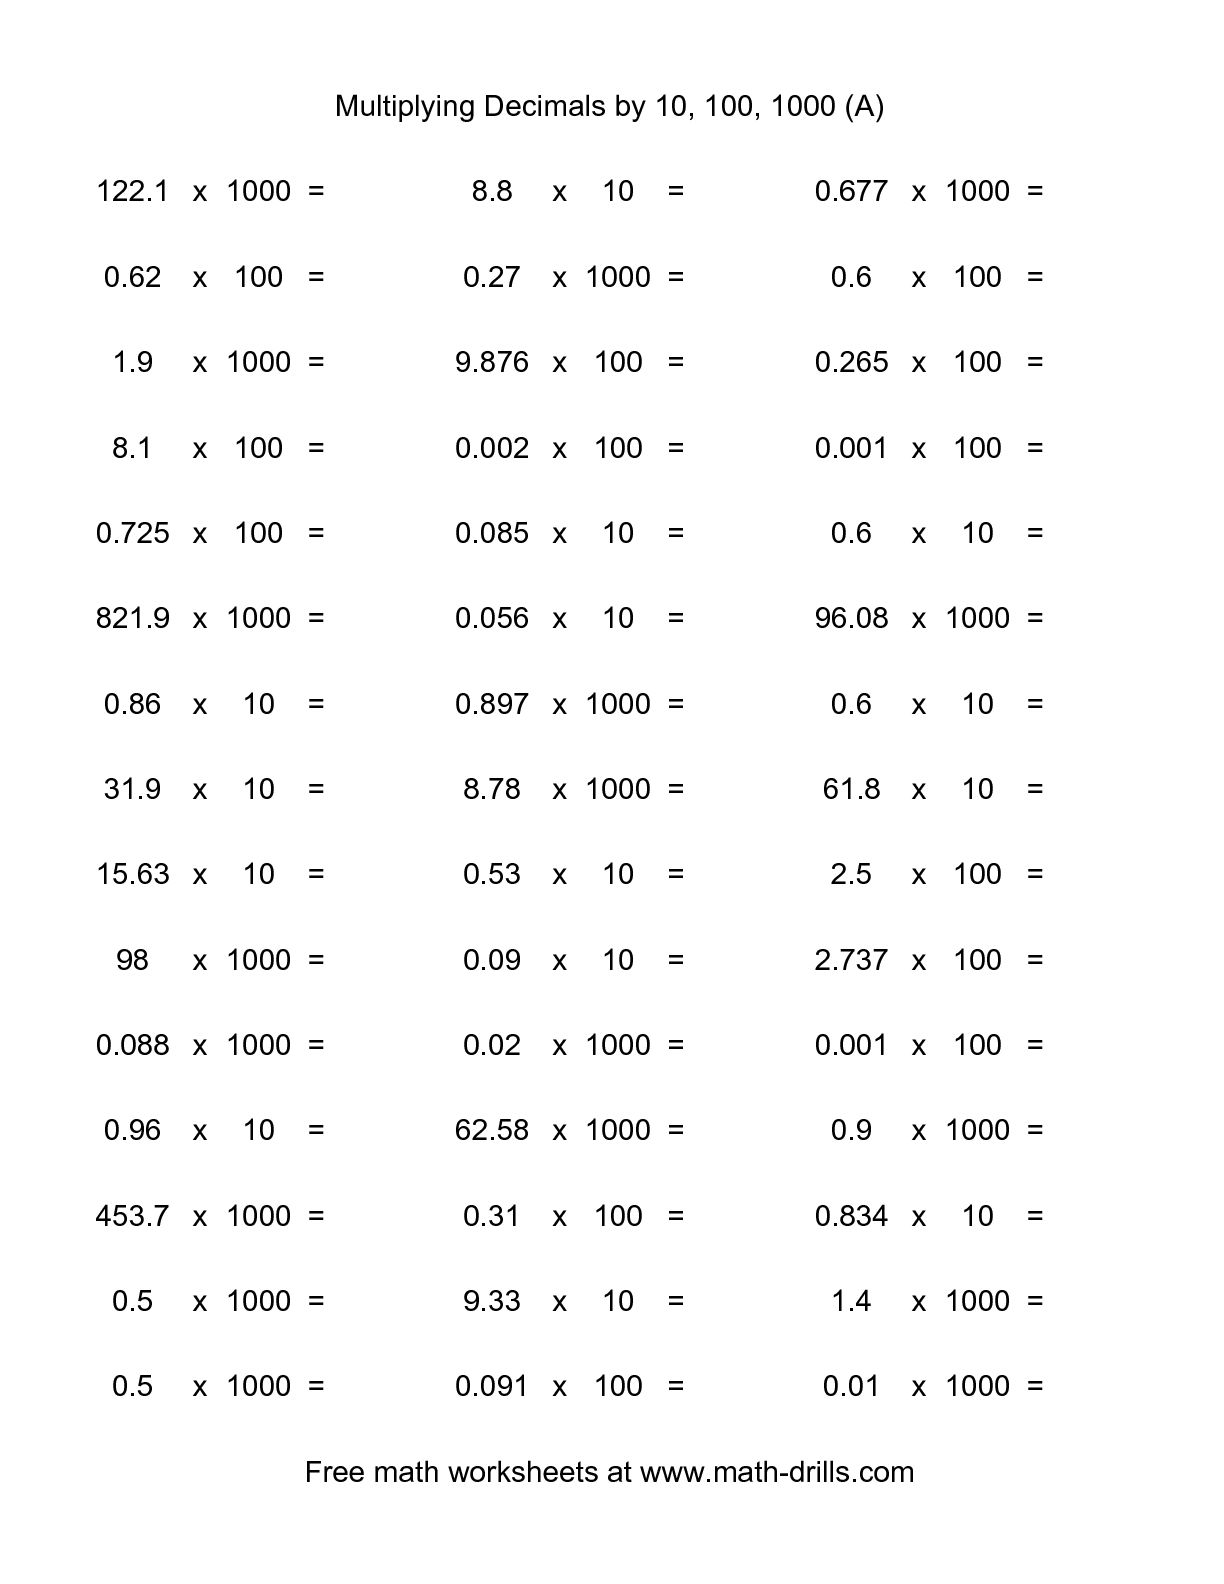 multiplication-of-decimals-worksheets-with-answers-decimal-operations-worksheet